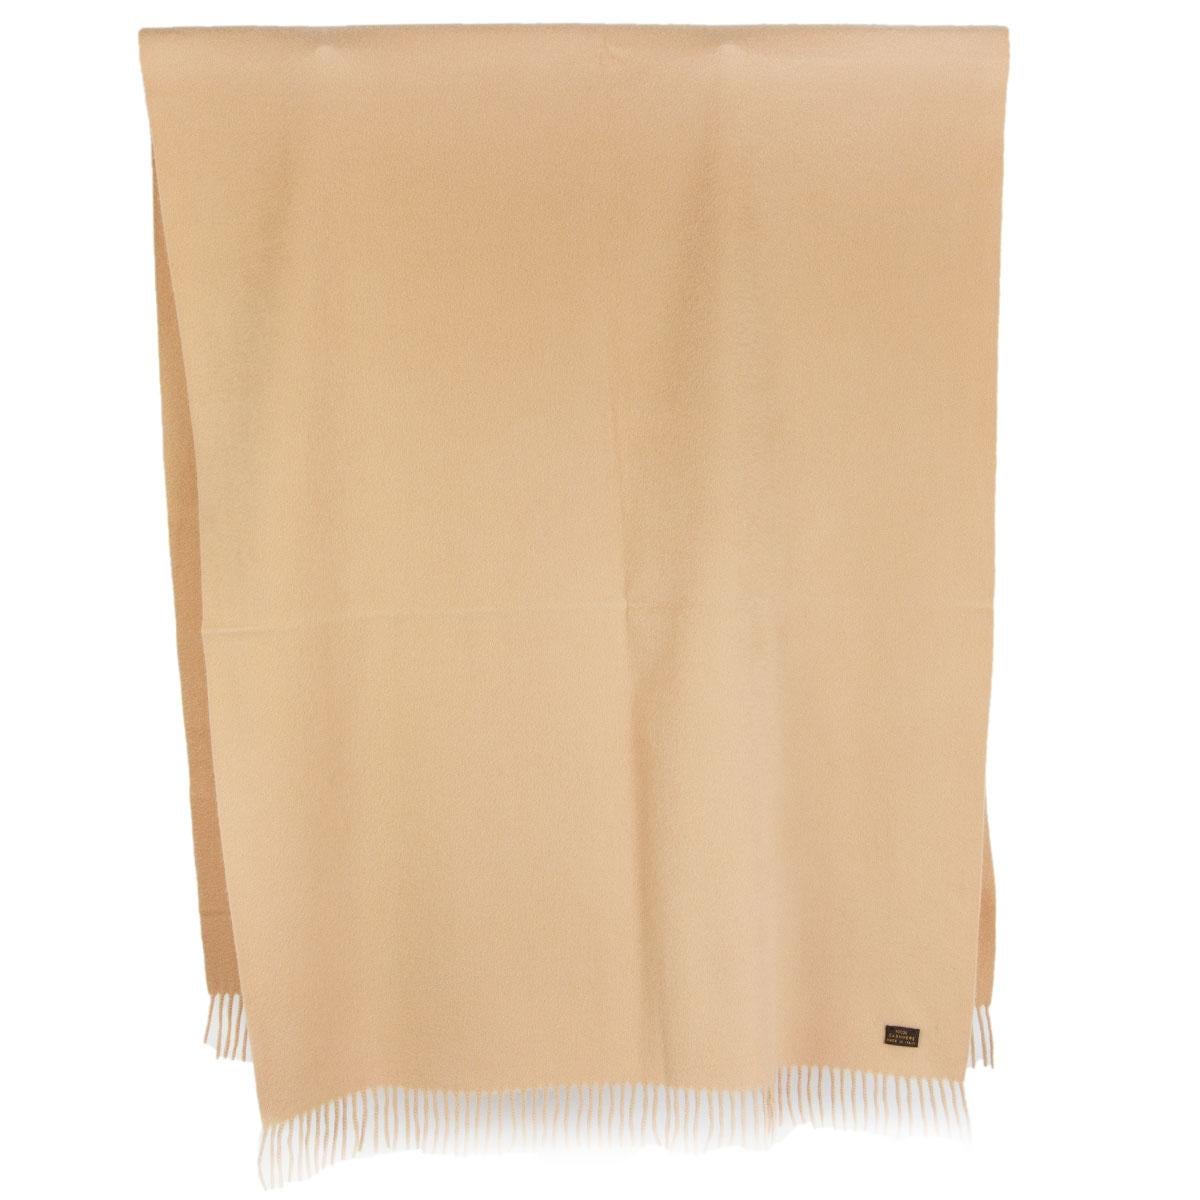 Loro Piana large shawl in beige cashmere (100%). Has been worn and is in excellent condition. 

Width 77cm (30in)
Length 194cm (75.7in)